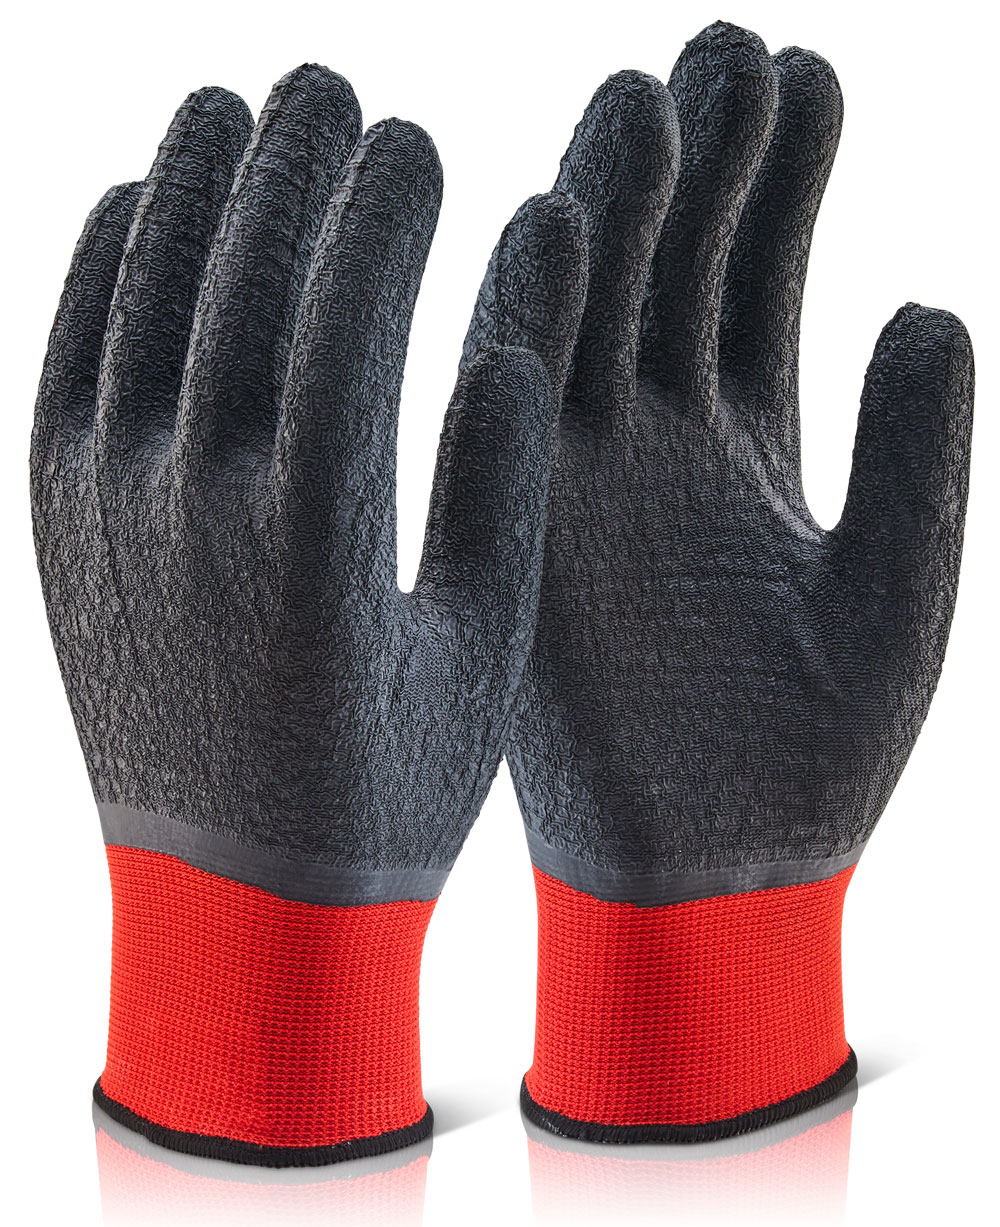 MULTI-PURPOSE FULLY COATED LATEX POLYESTER KNITTED GLOVE - MP4FC